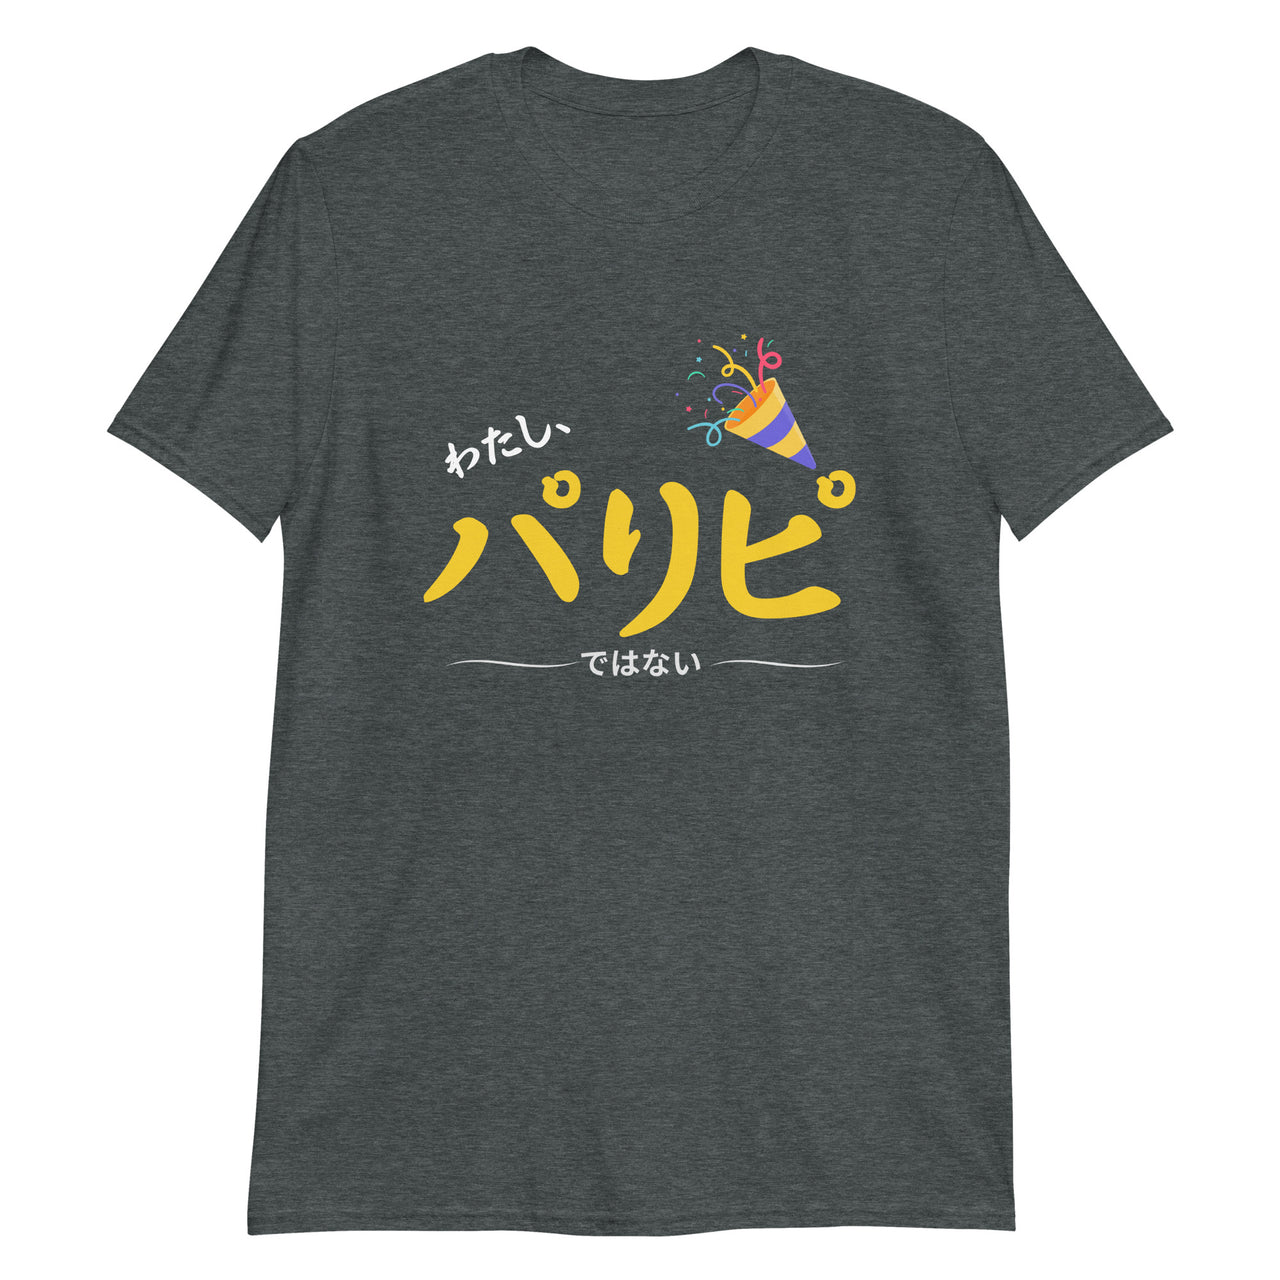 Not a Party Person in Japanese T-Shirt